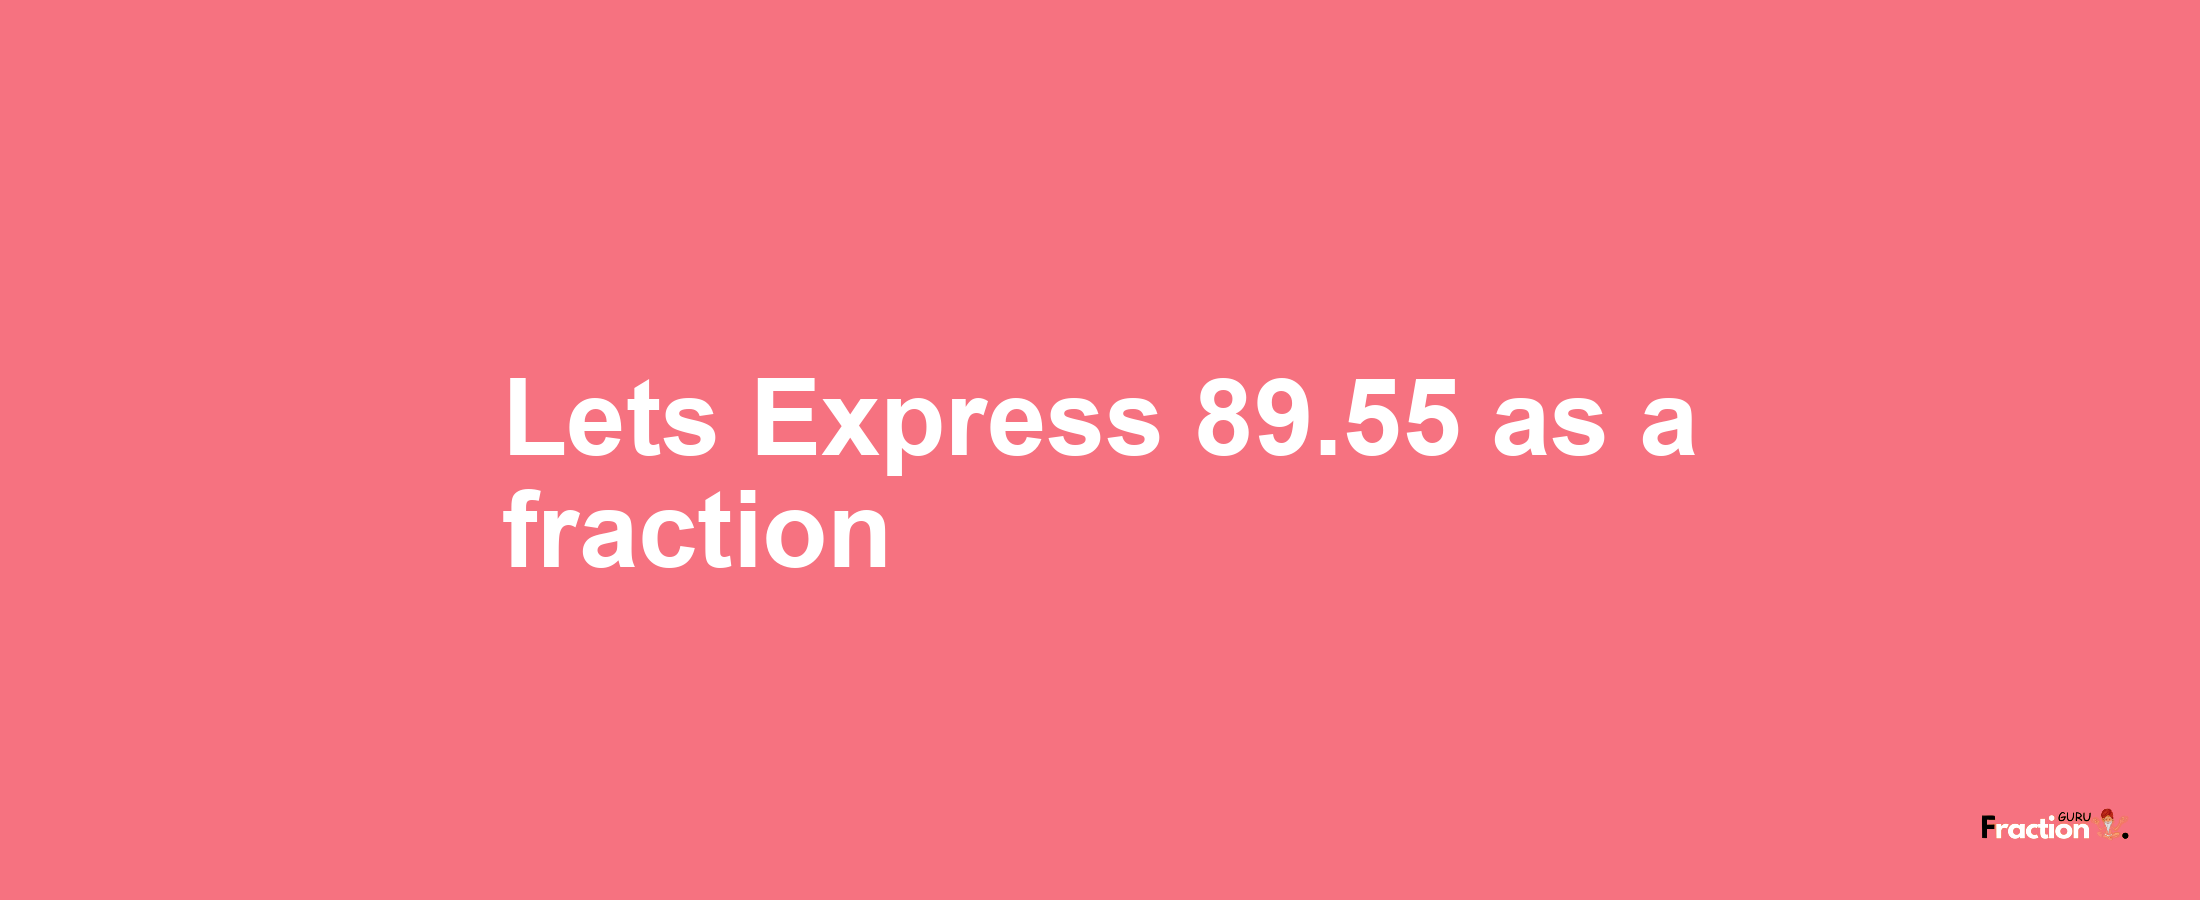 Lets Express 89.55 as afraction